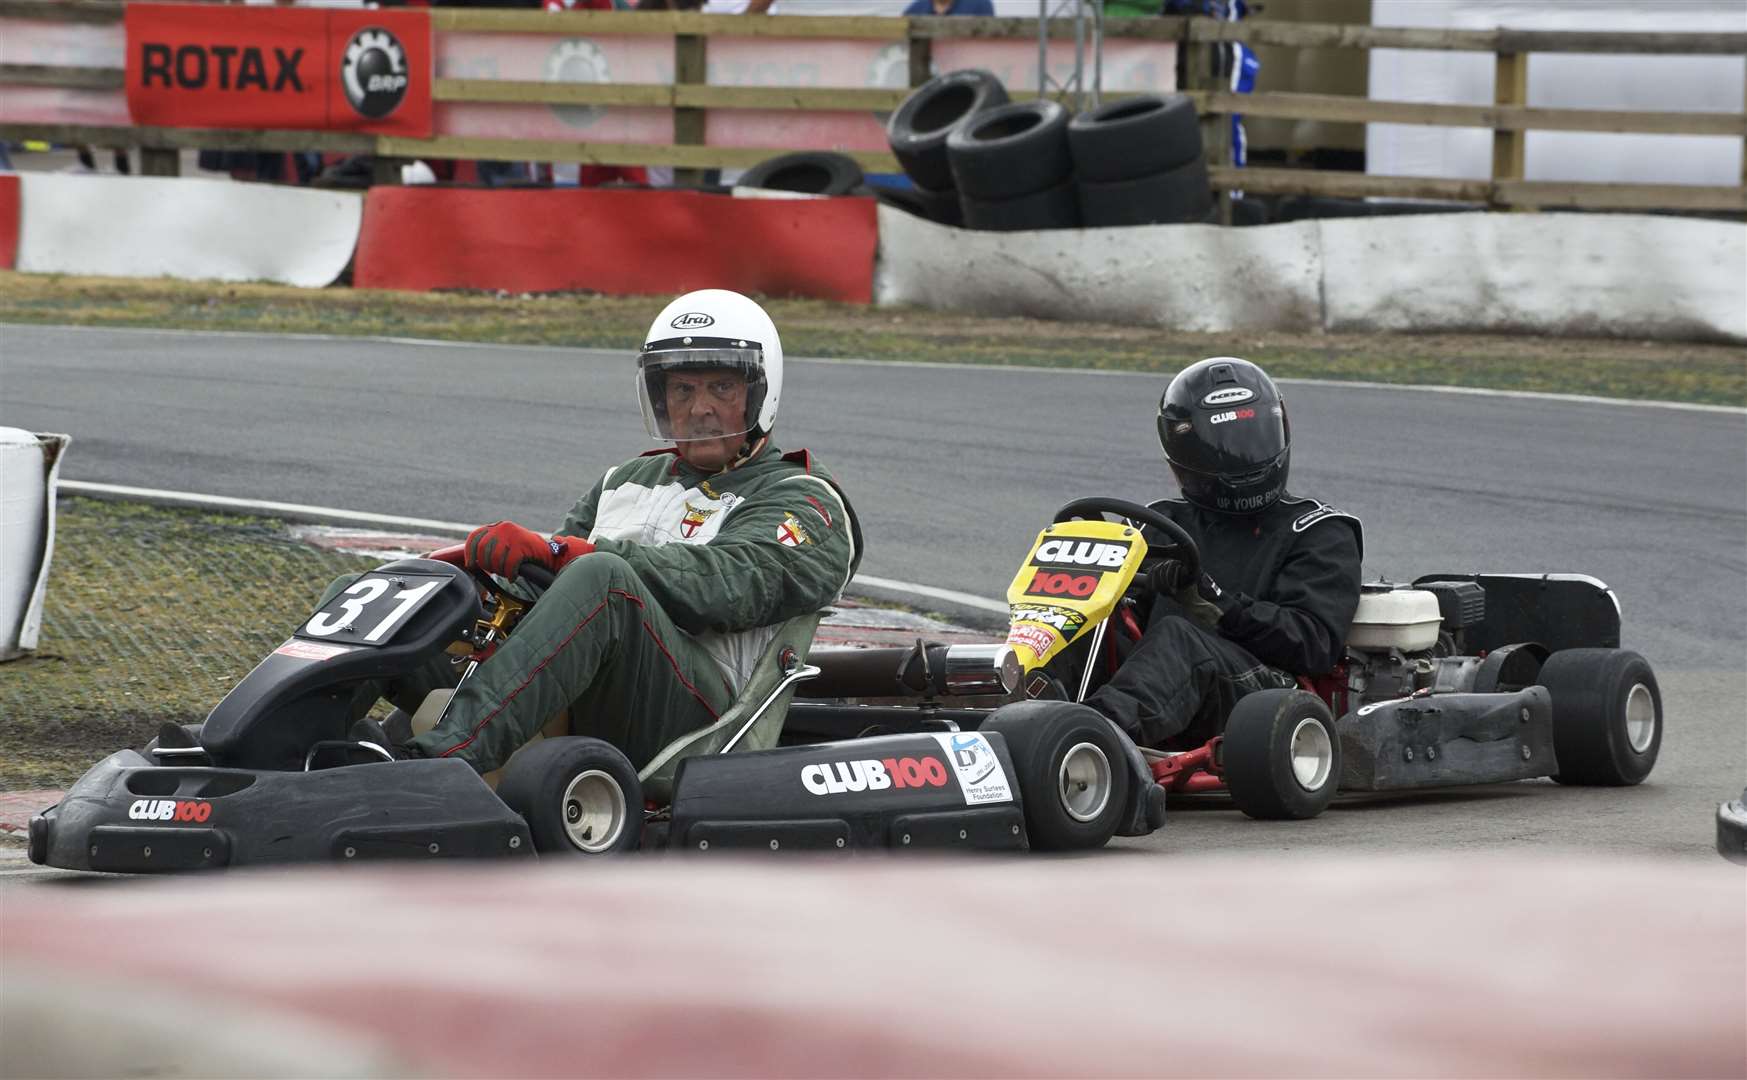 Former Kent County Council leader Sir Paul Carter, a keen historic racer, gets a push start after spinning in practice for the Henry's Headway Karting Challenge in 2010. Picture: Andy Payton